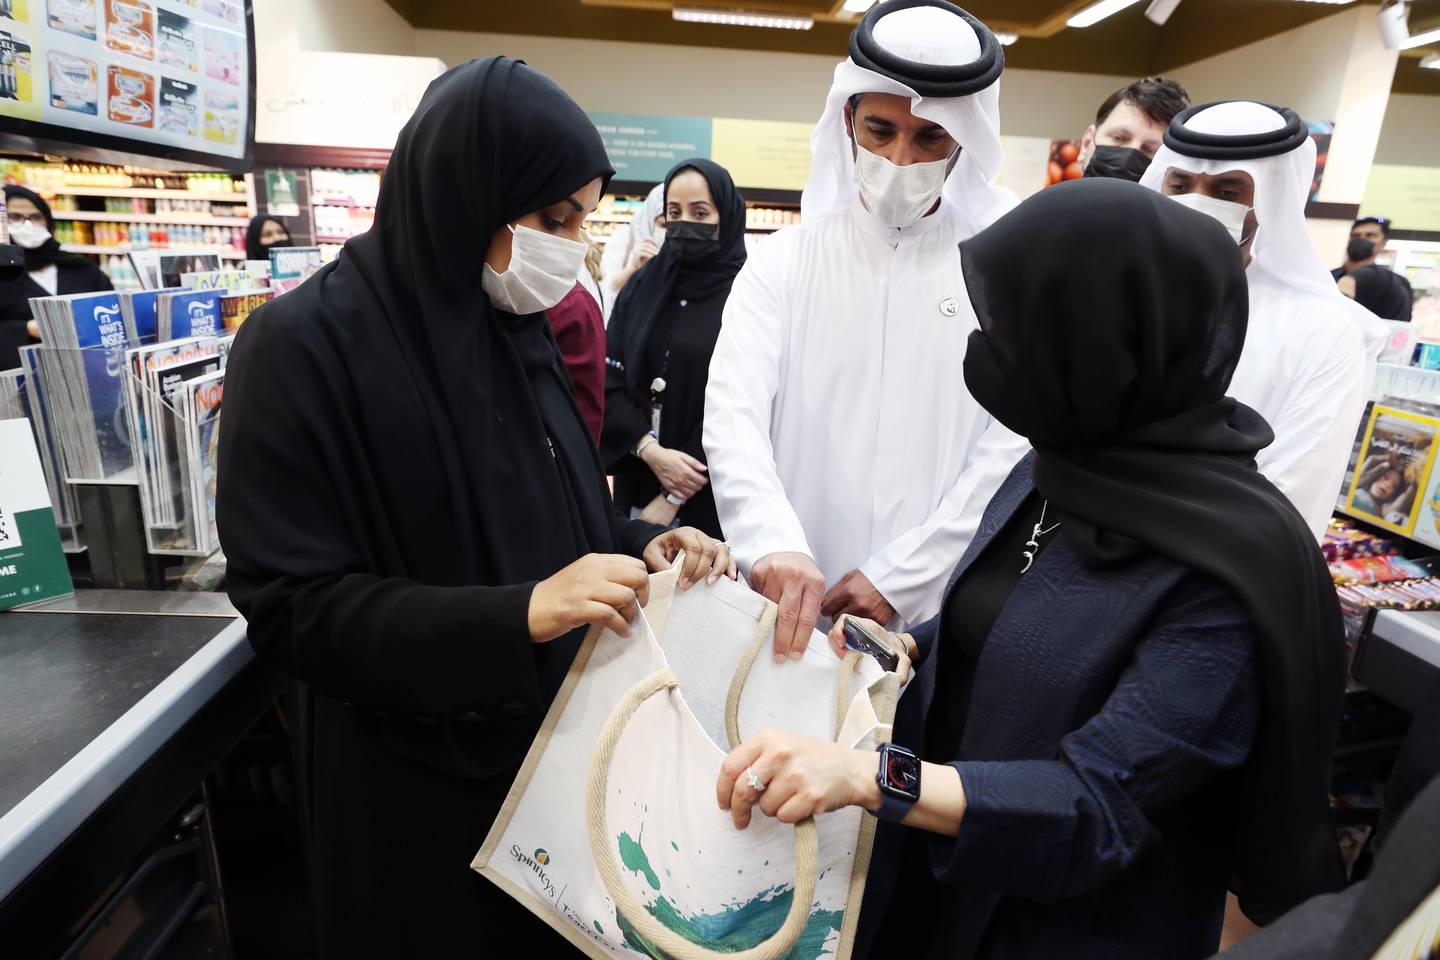 From June 1, Abu Dhabi will ban the use of single-use plastic bags. Shaikha Salem Al Dhaheri, in white mask, EAD's secretary general, on a visit to Spinneys, Muroor Road, Abu Dhabi. Chris Whiteoak / The National